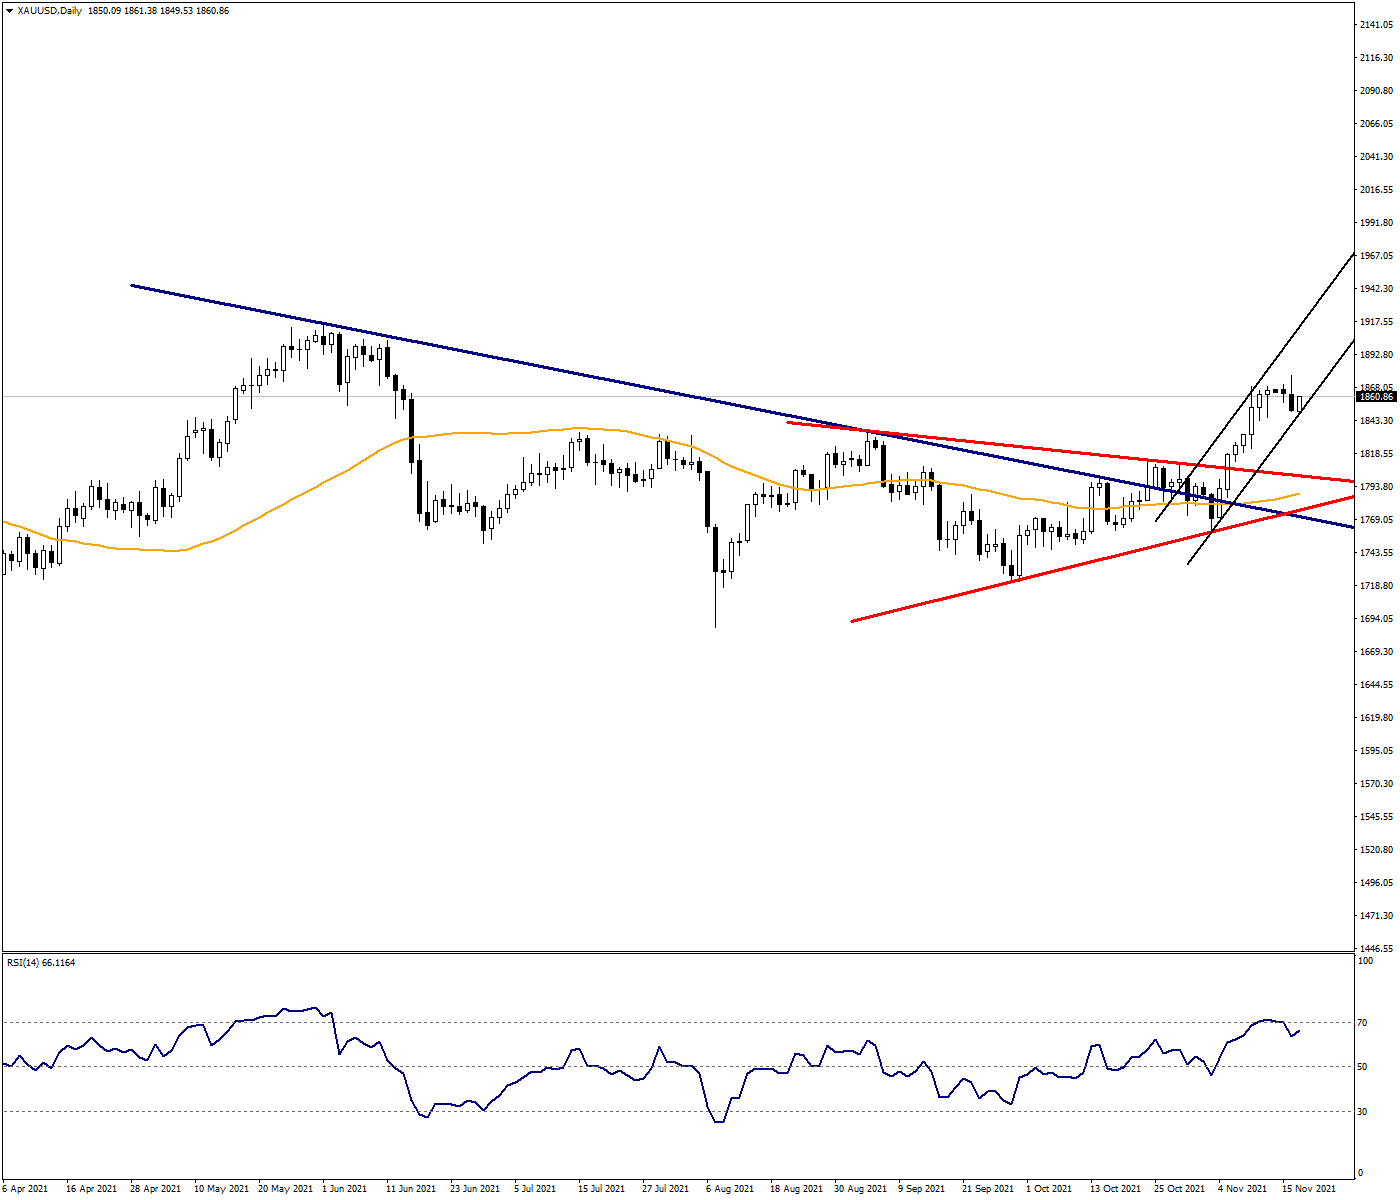 1850 support plays an important role in Gold